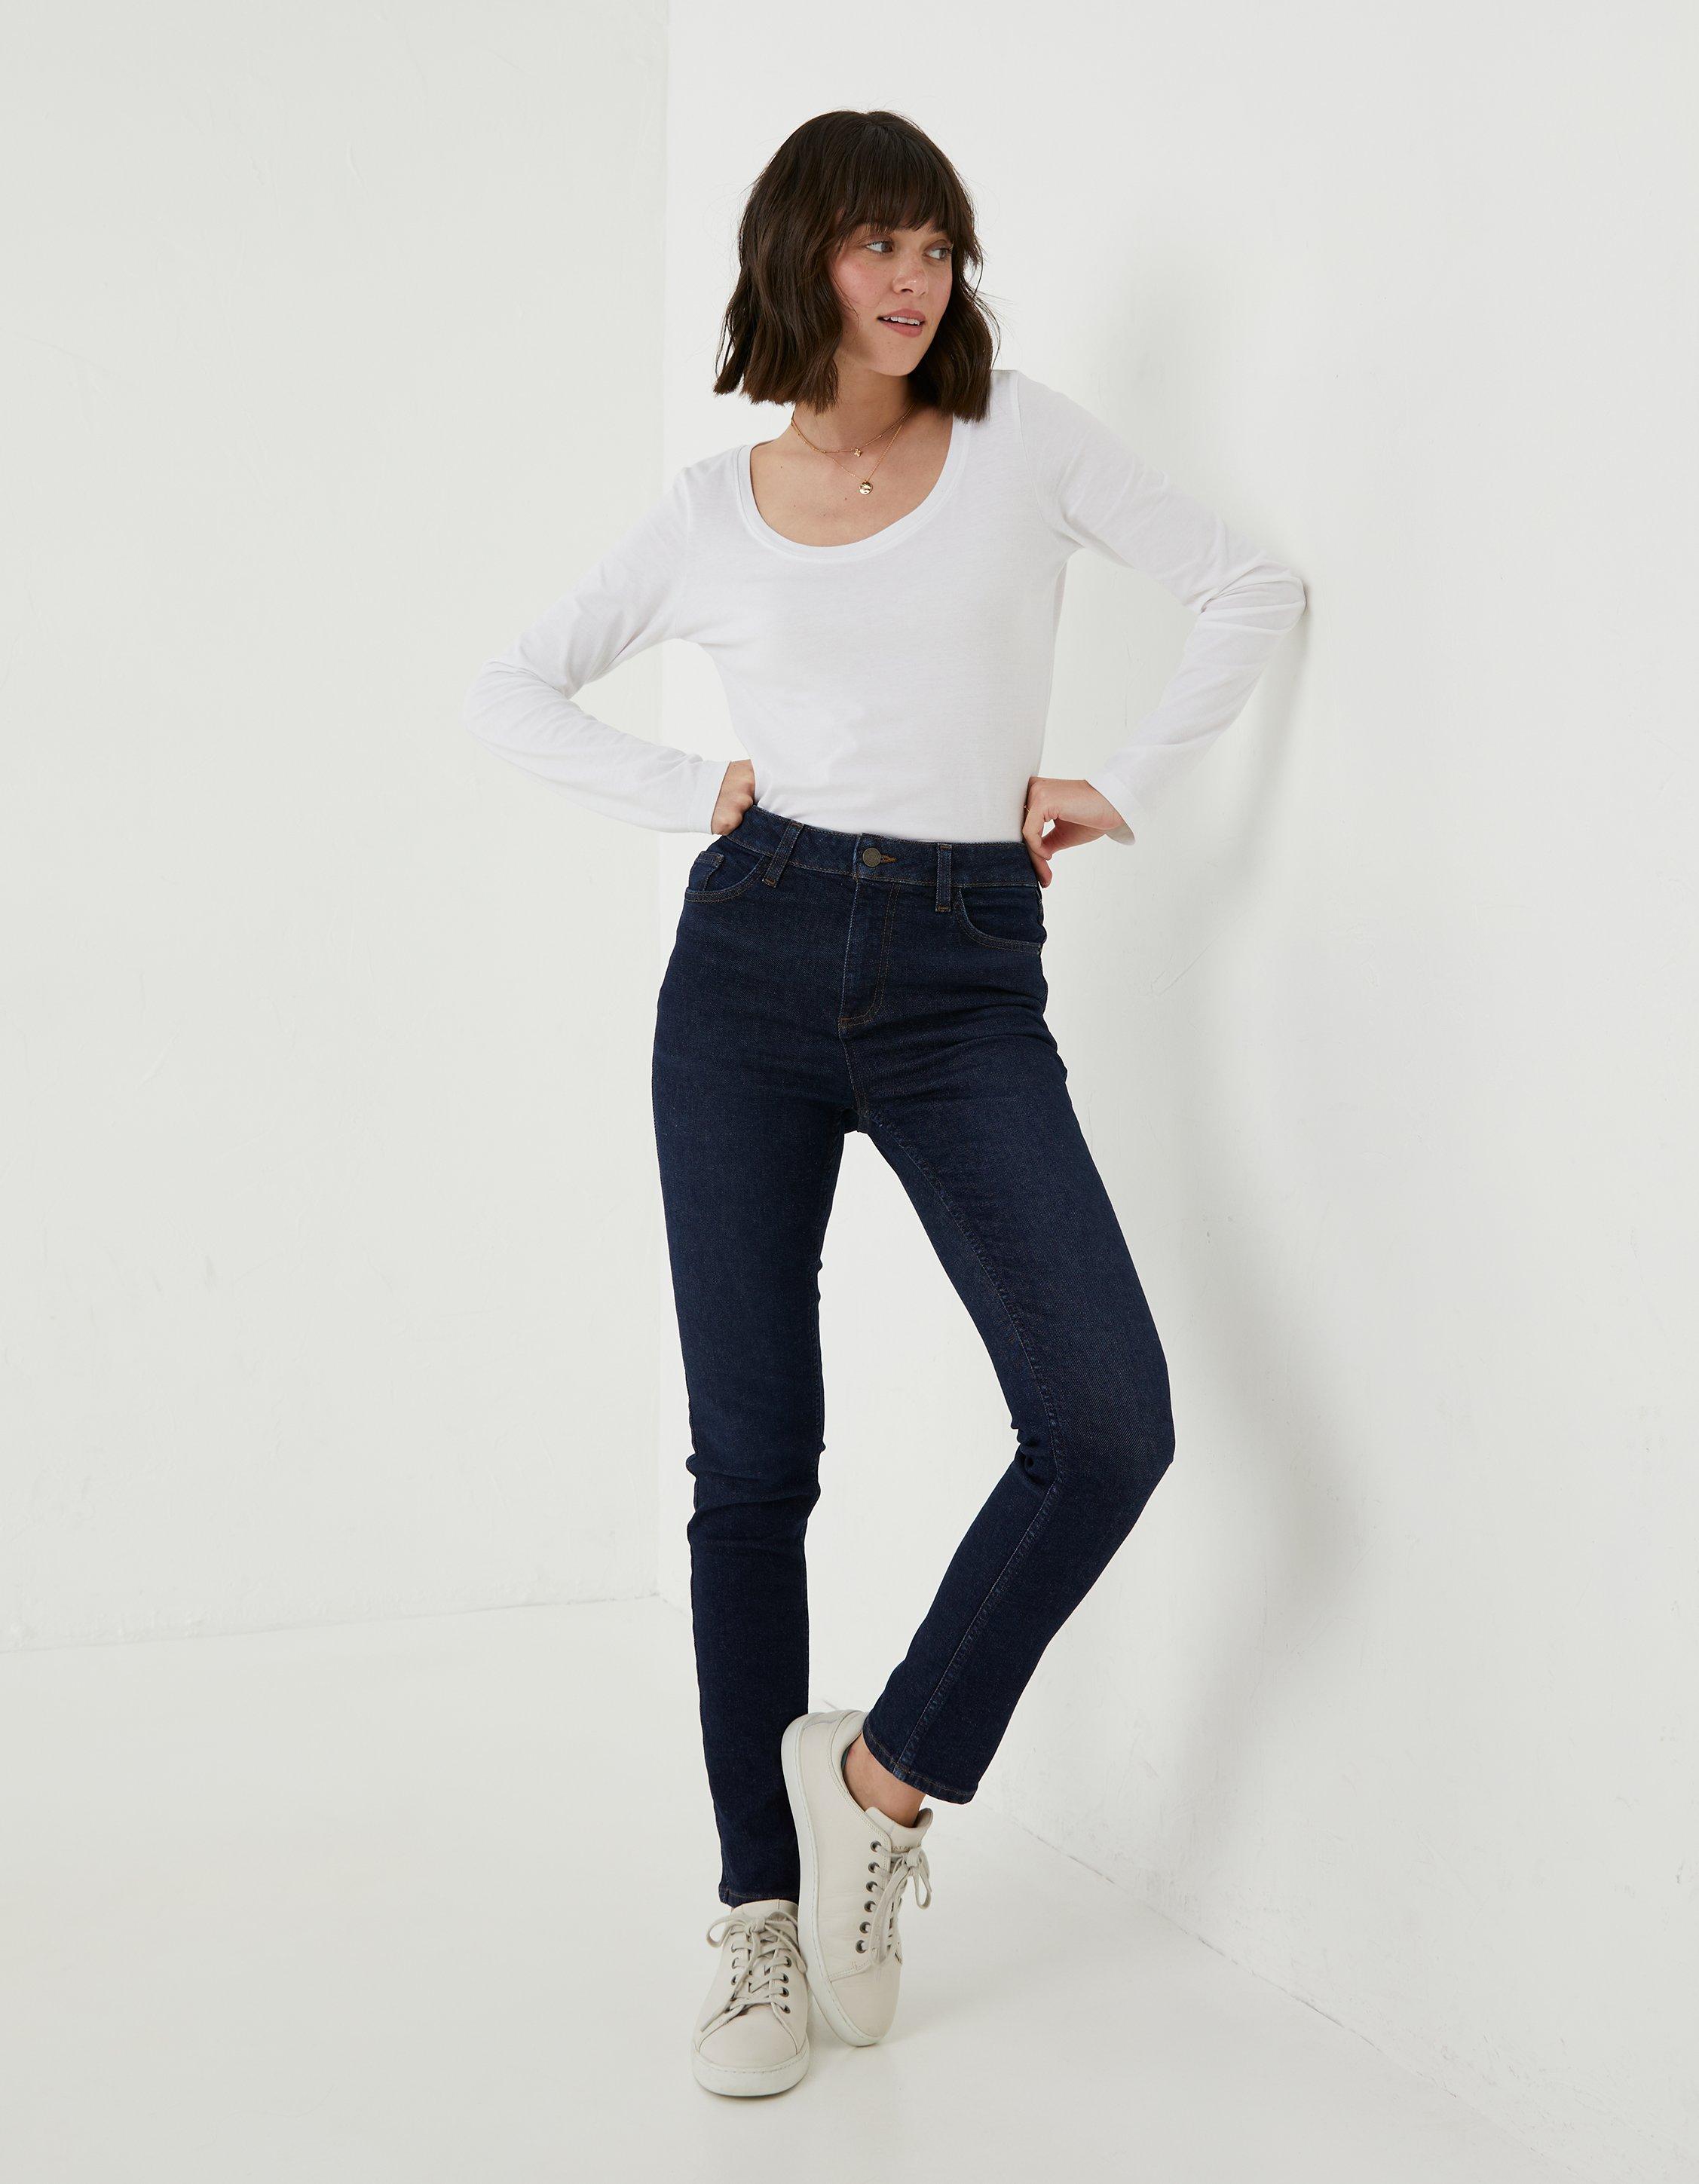 Seam Front Ankle Grazer Pants